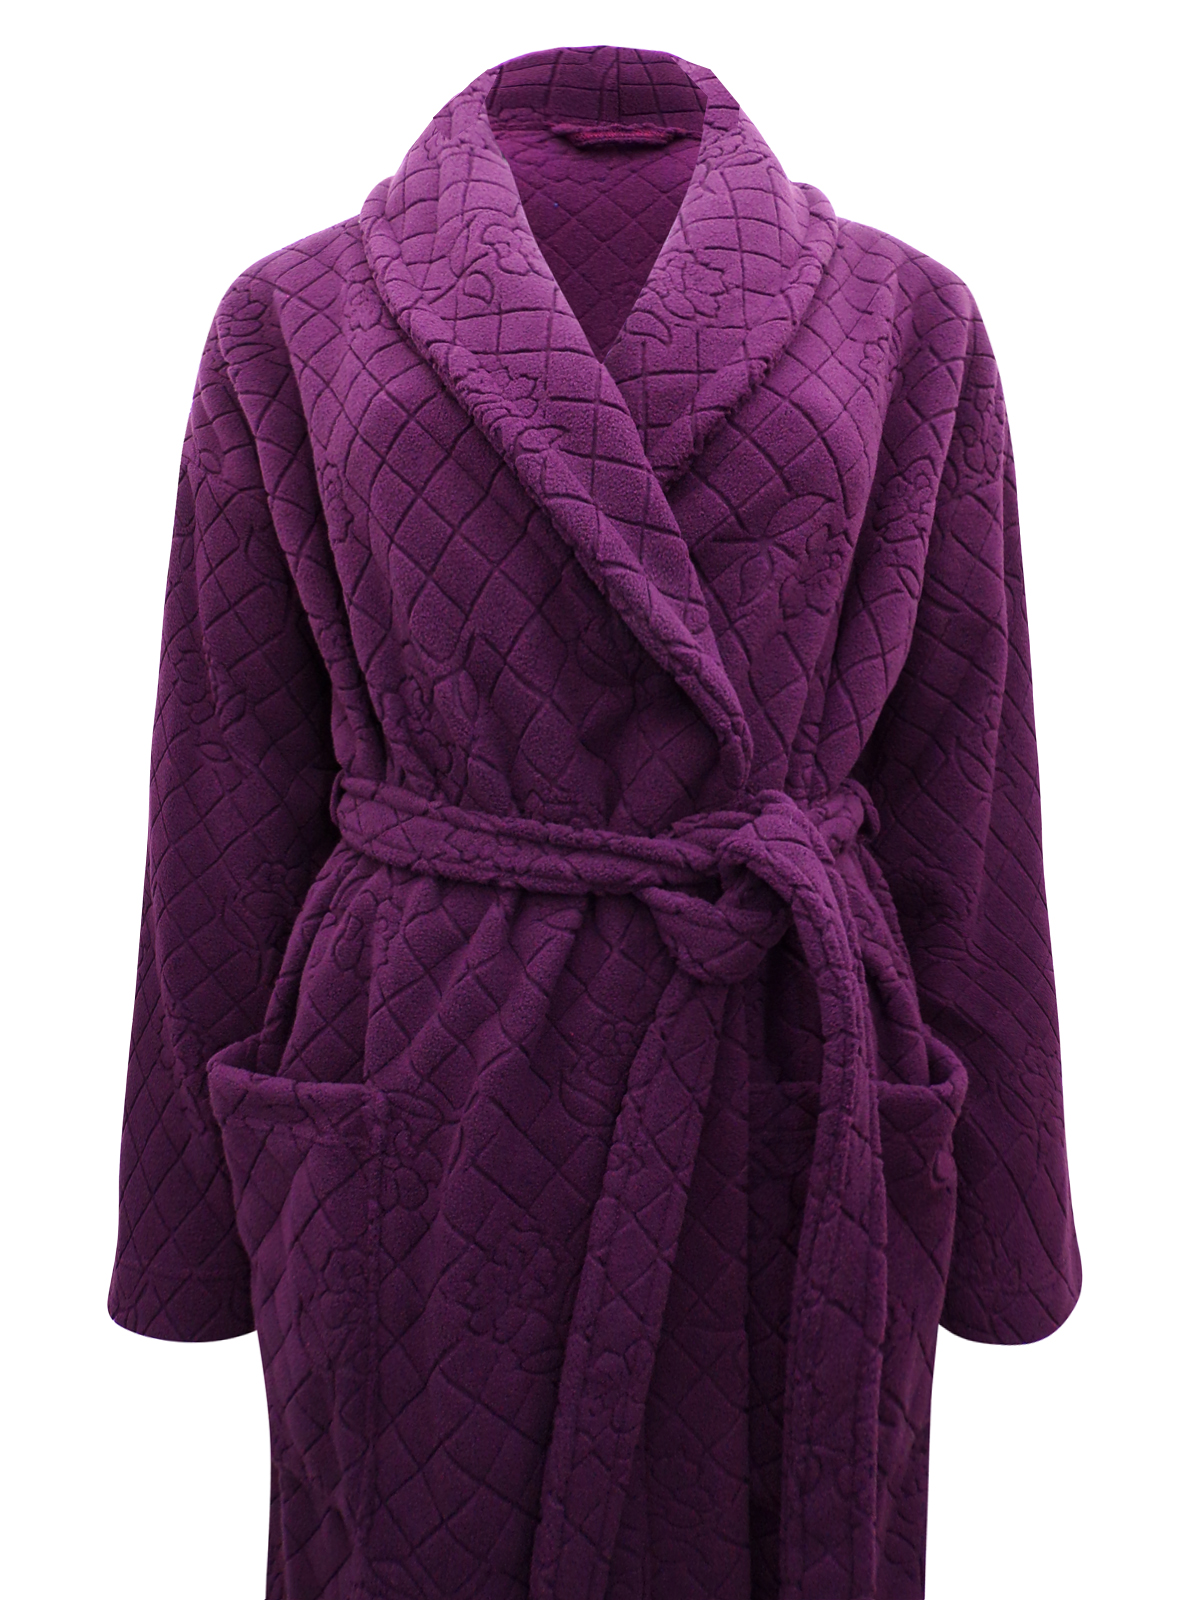 Marks and Spencer - - M&amp;5 PURPLE Jacquard Textured Fleece Wrap Dressing